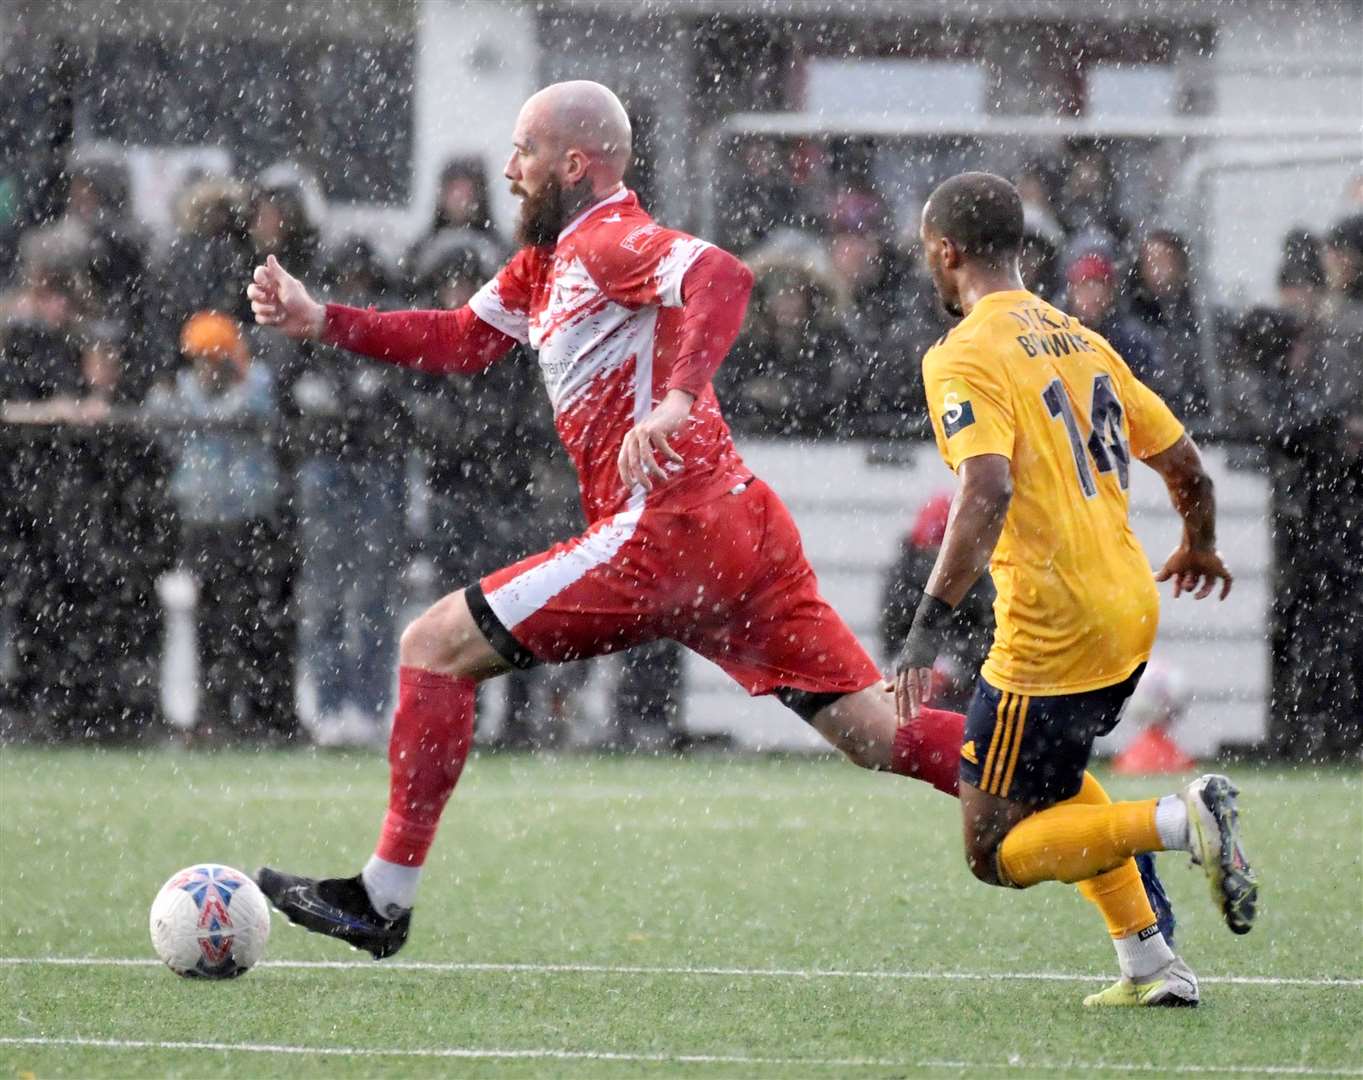 Joe Ellul starred in Ramsgate’s FA Cup first-round victory over Woking. Picture: Barry Goodwin